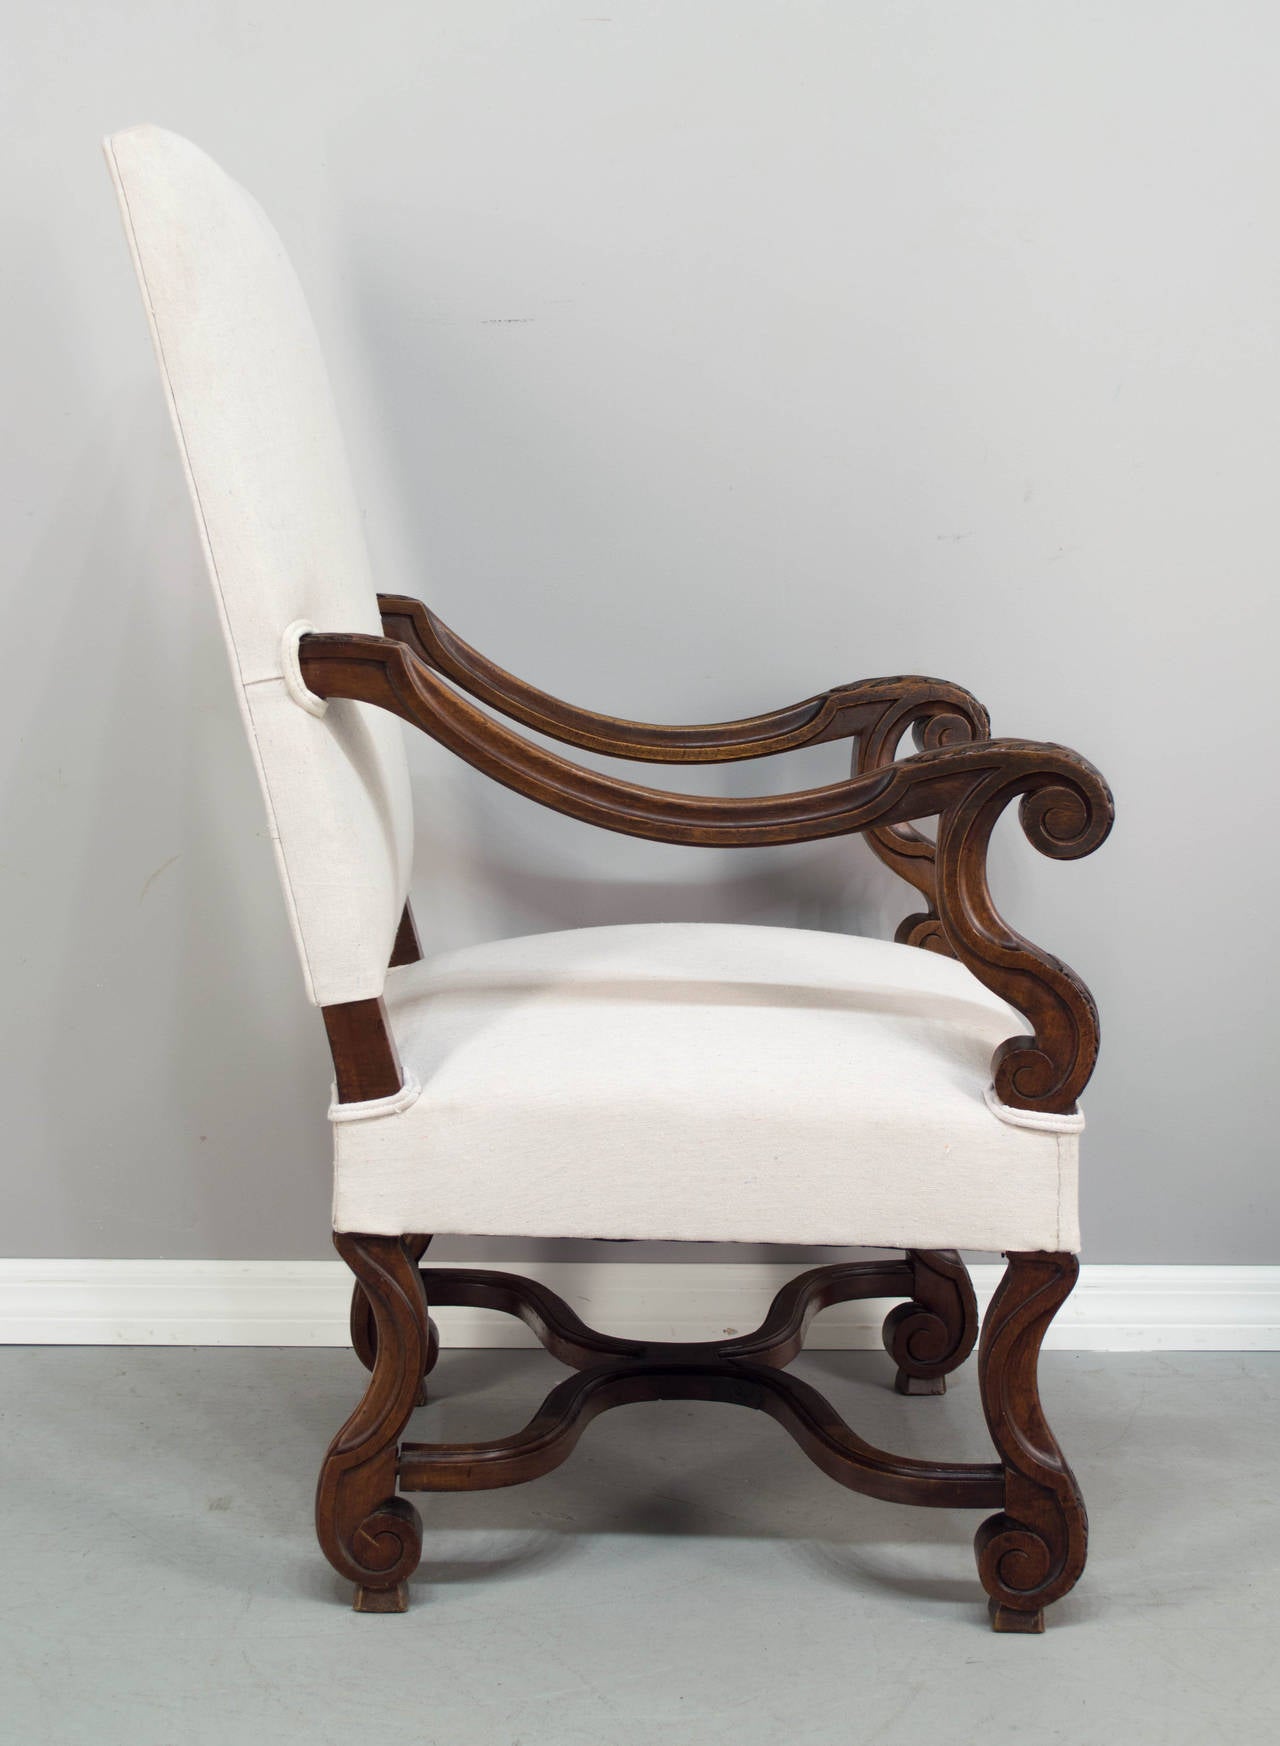 A good pair of Louis XIV style fauteuils, or arm chairs, c.1900-1920. Made of walnut with nice, hand carved details, sturdy construction and comfortable seating. The height of the arm rest at the front is 26.5